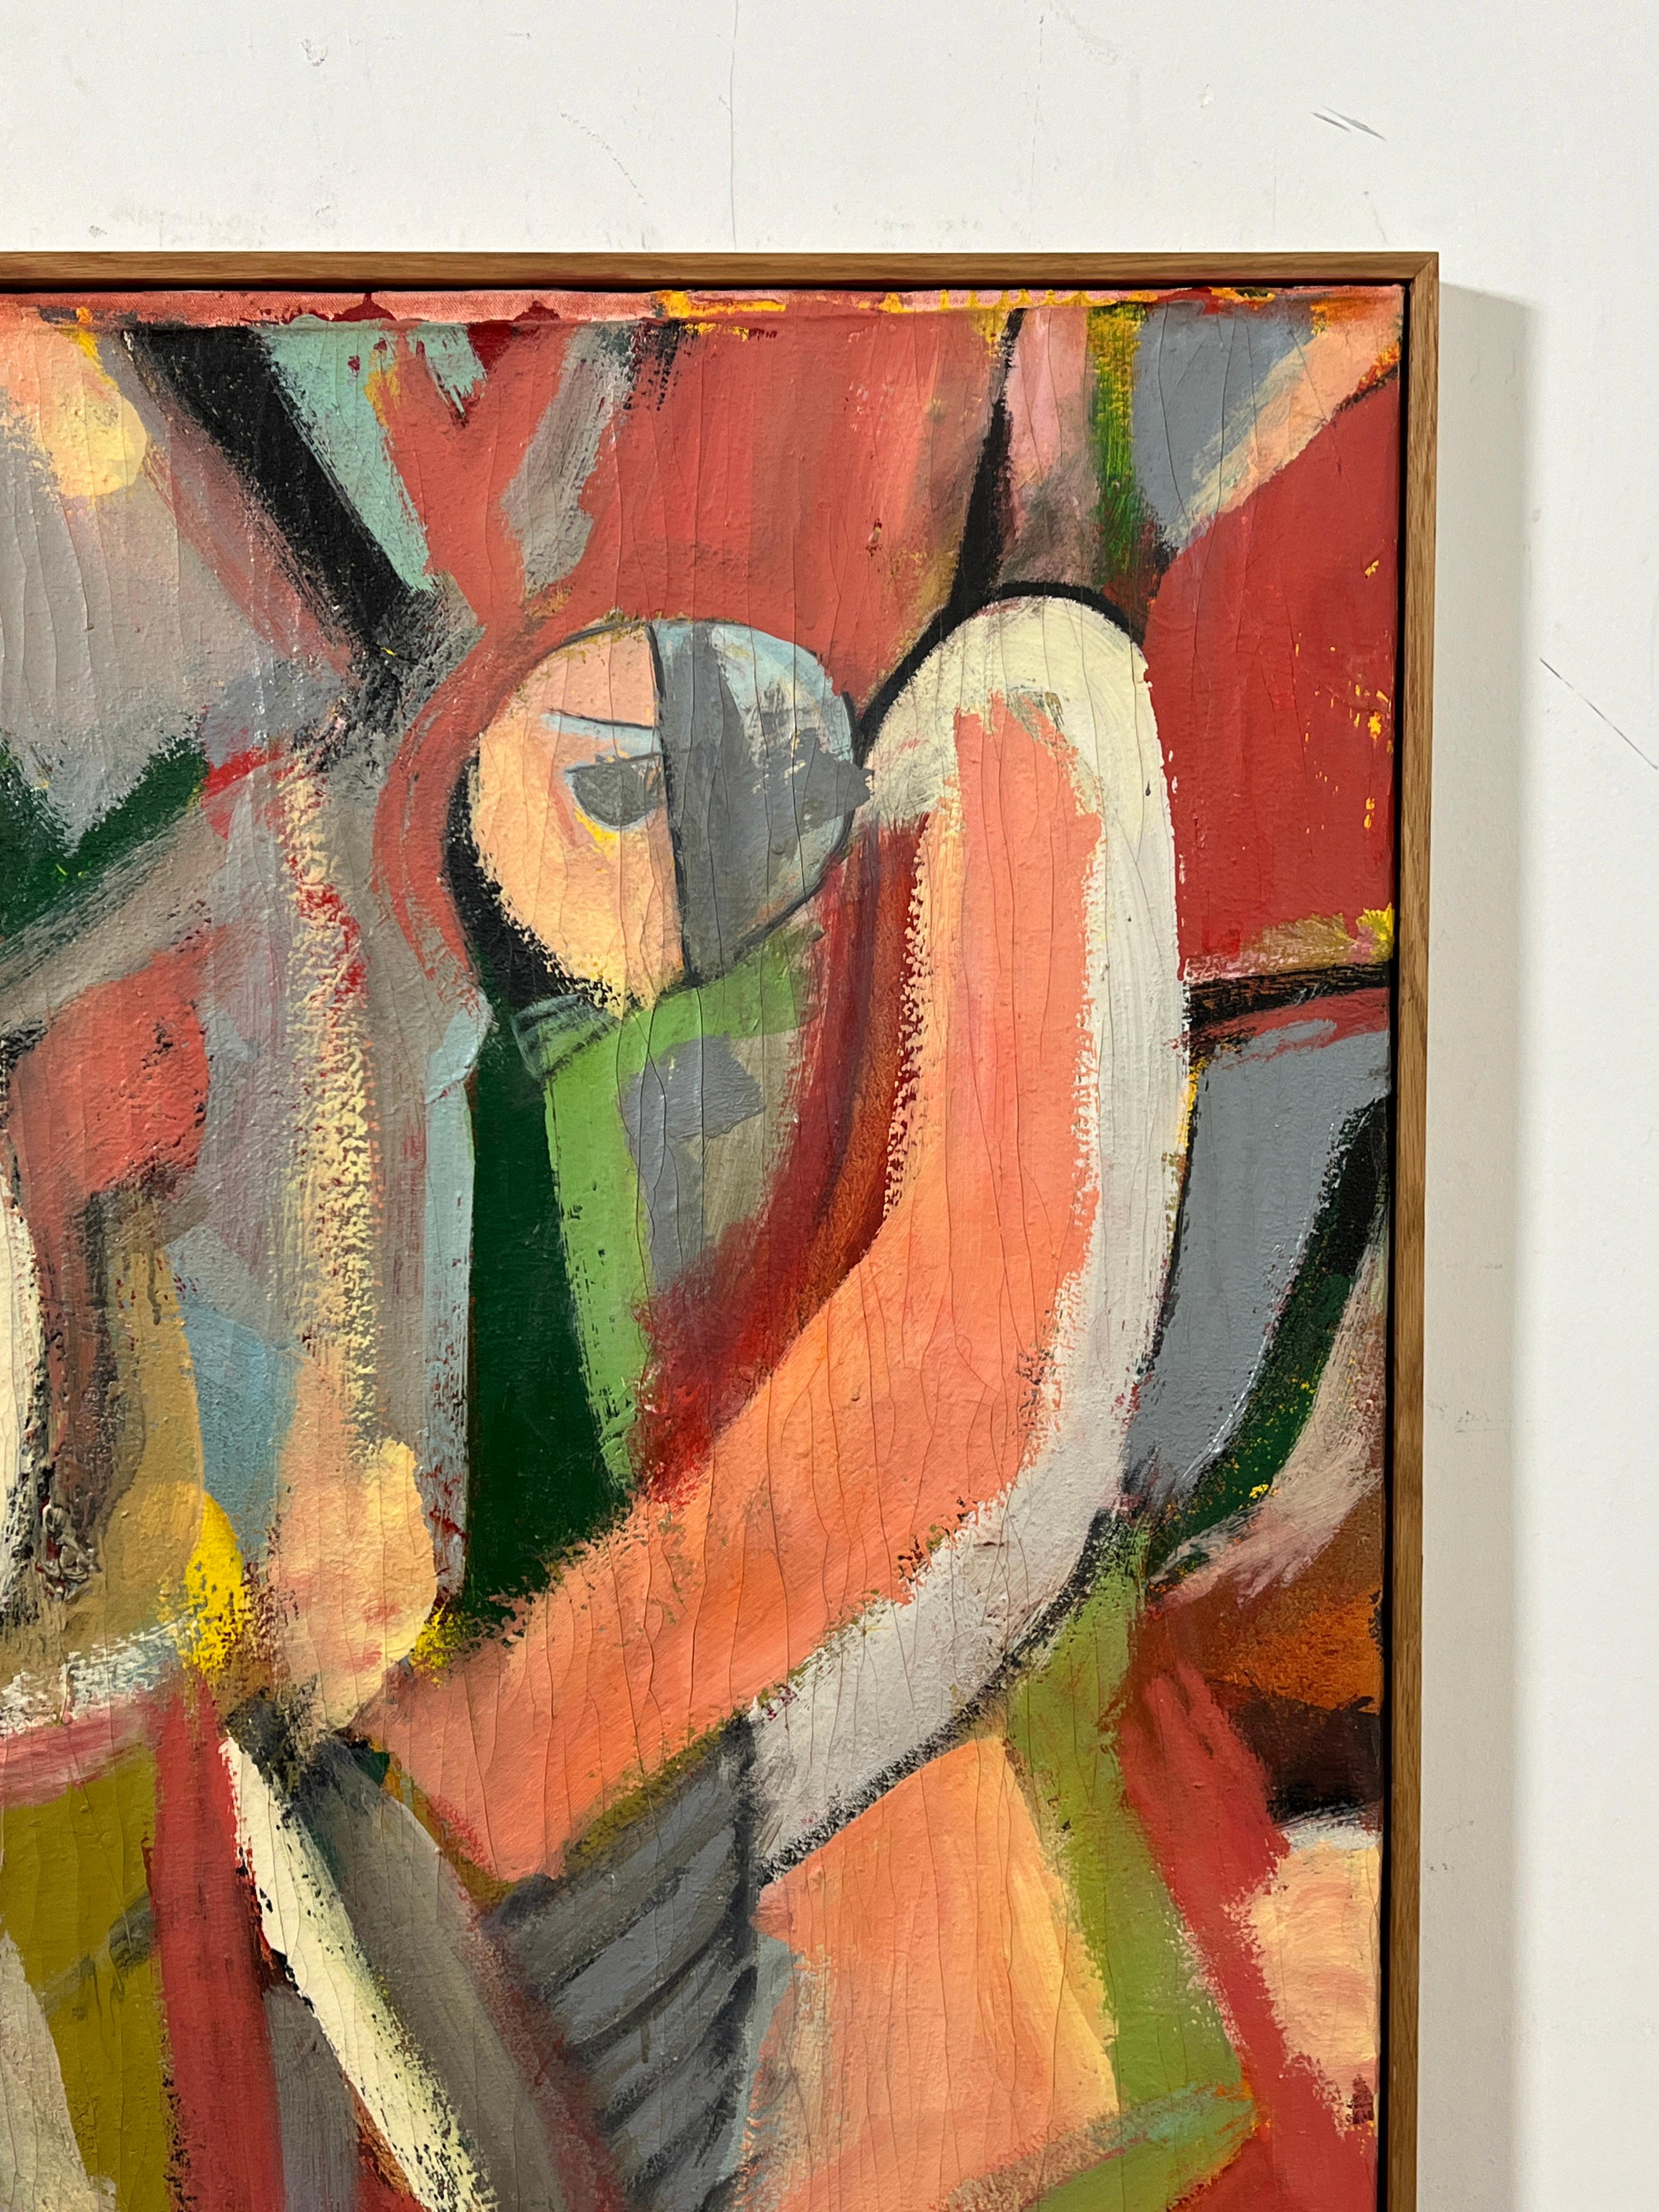 Early abstract modernist painting by the noted painter Chase Bailey, who was also an accomplished film writer, actor, producer, and director who has worked with John Malkovich, Johnny Depp, and Uma Thurman, among others.  Signed lower right 